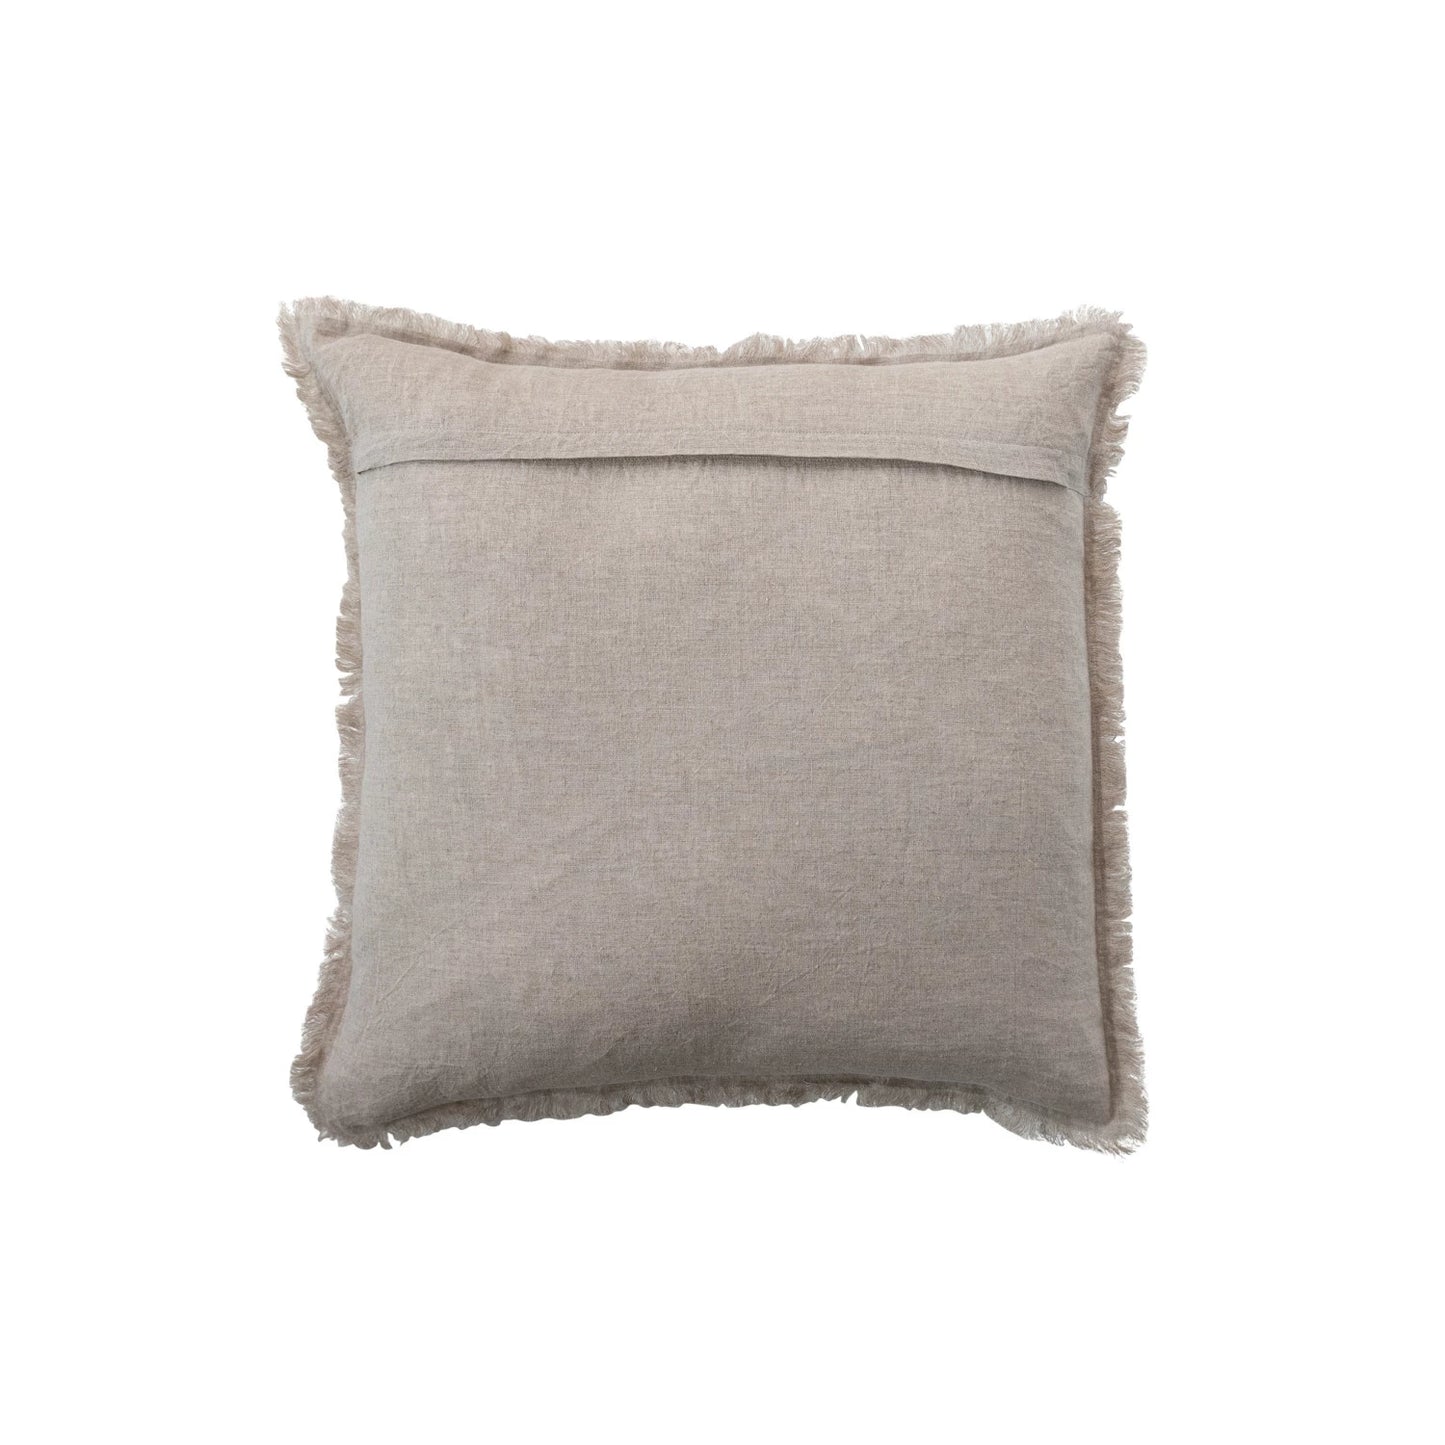 Square Stonewashed Linen Pillow - Natural